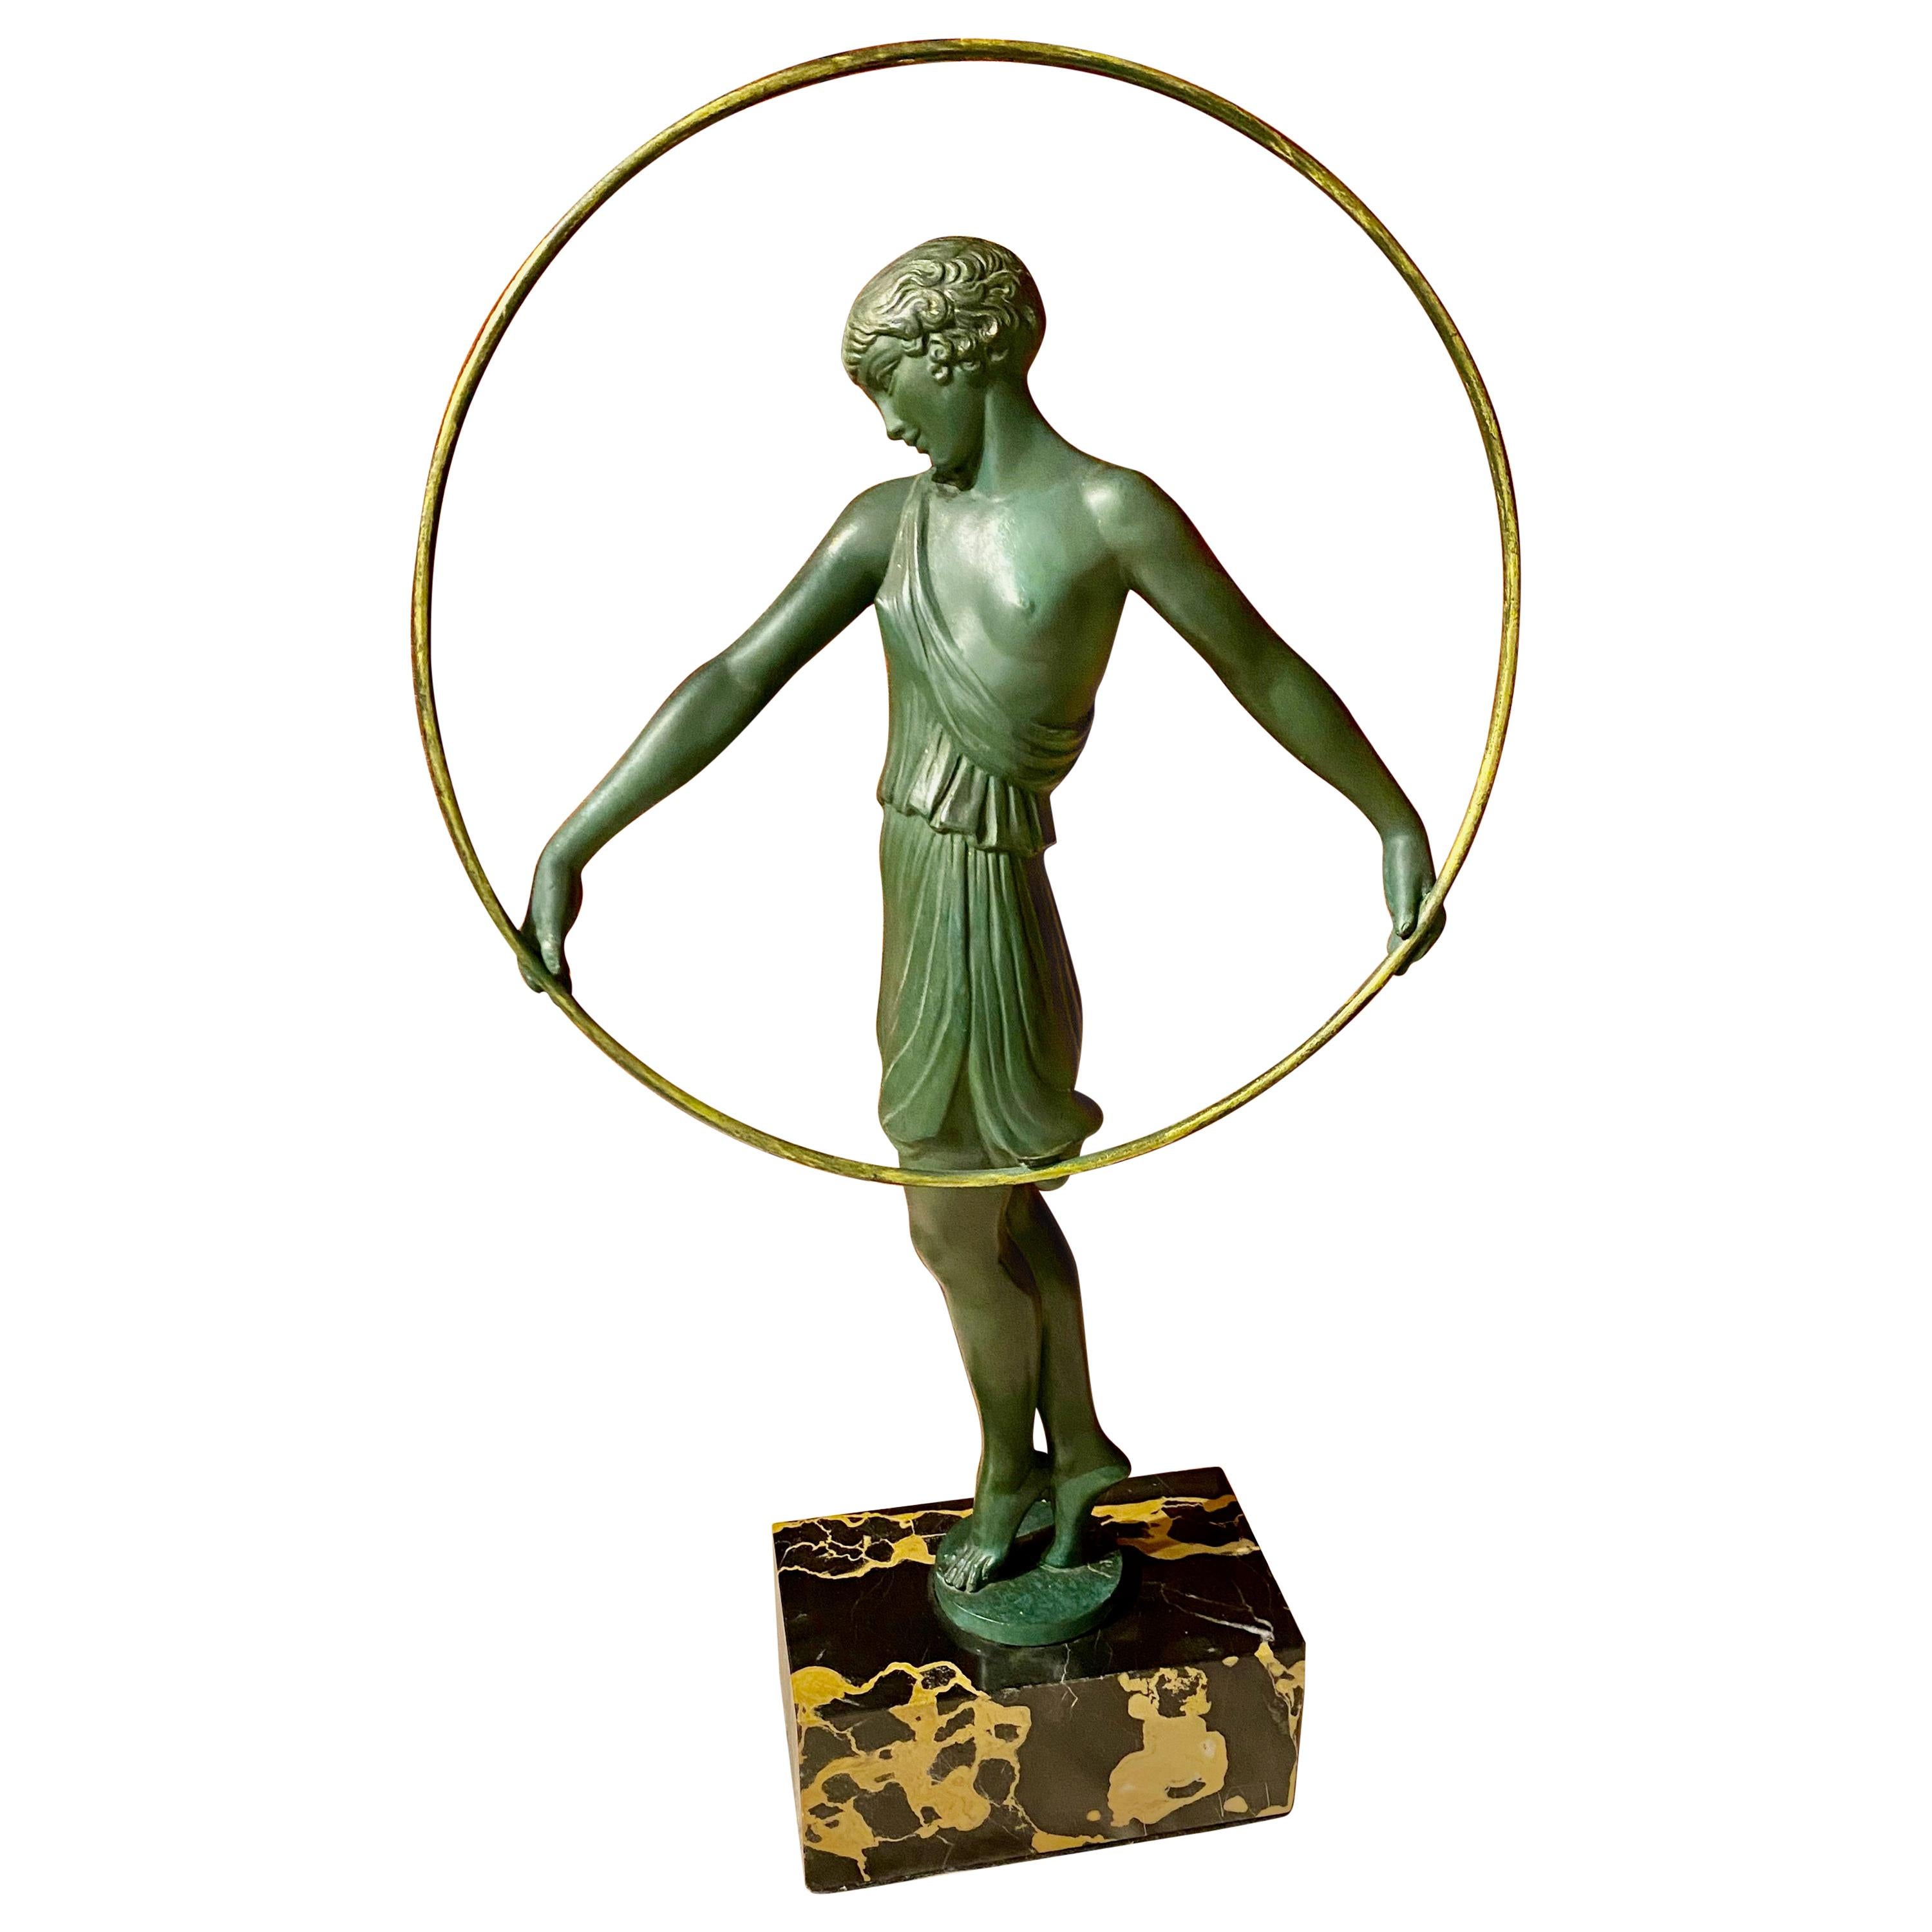 Pierre Le Faguays Dancer with Hoop Art Deco Green Patented Sculpture Fayral